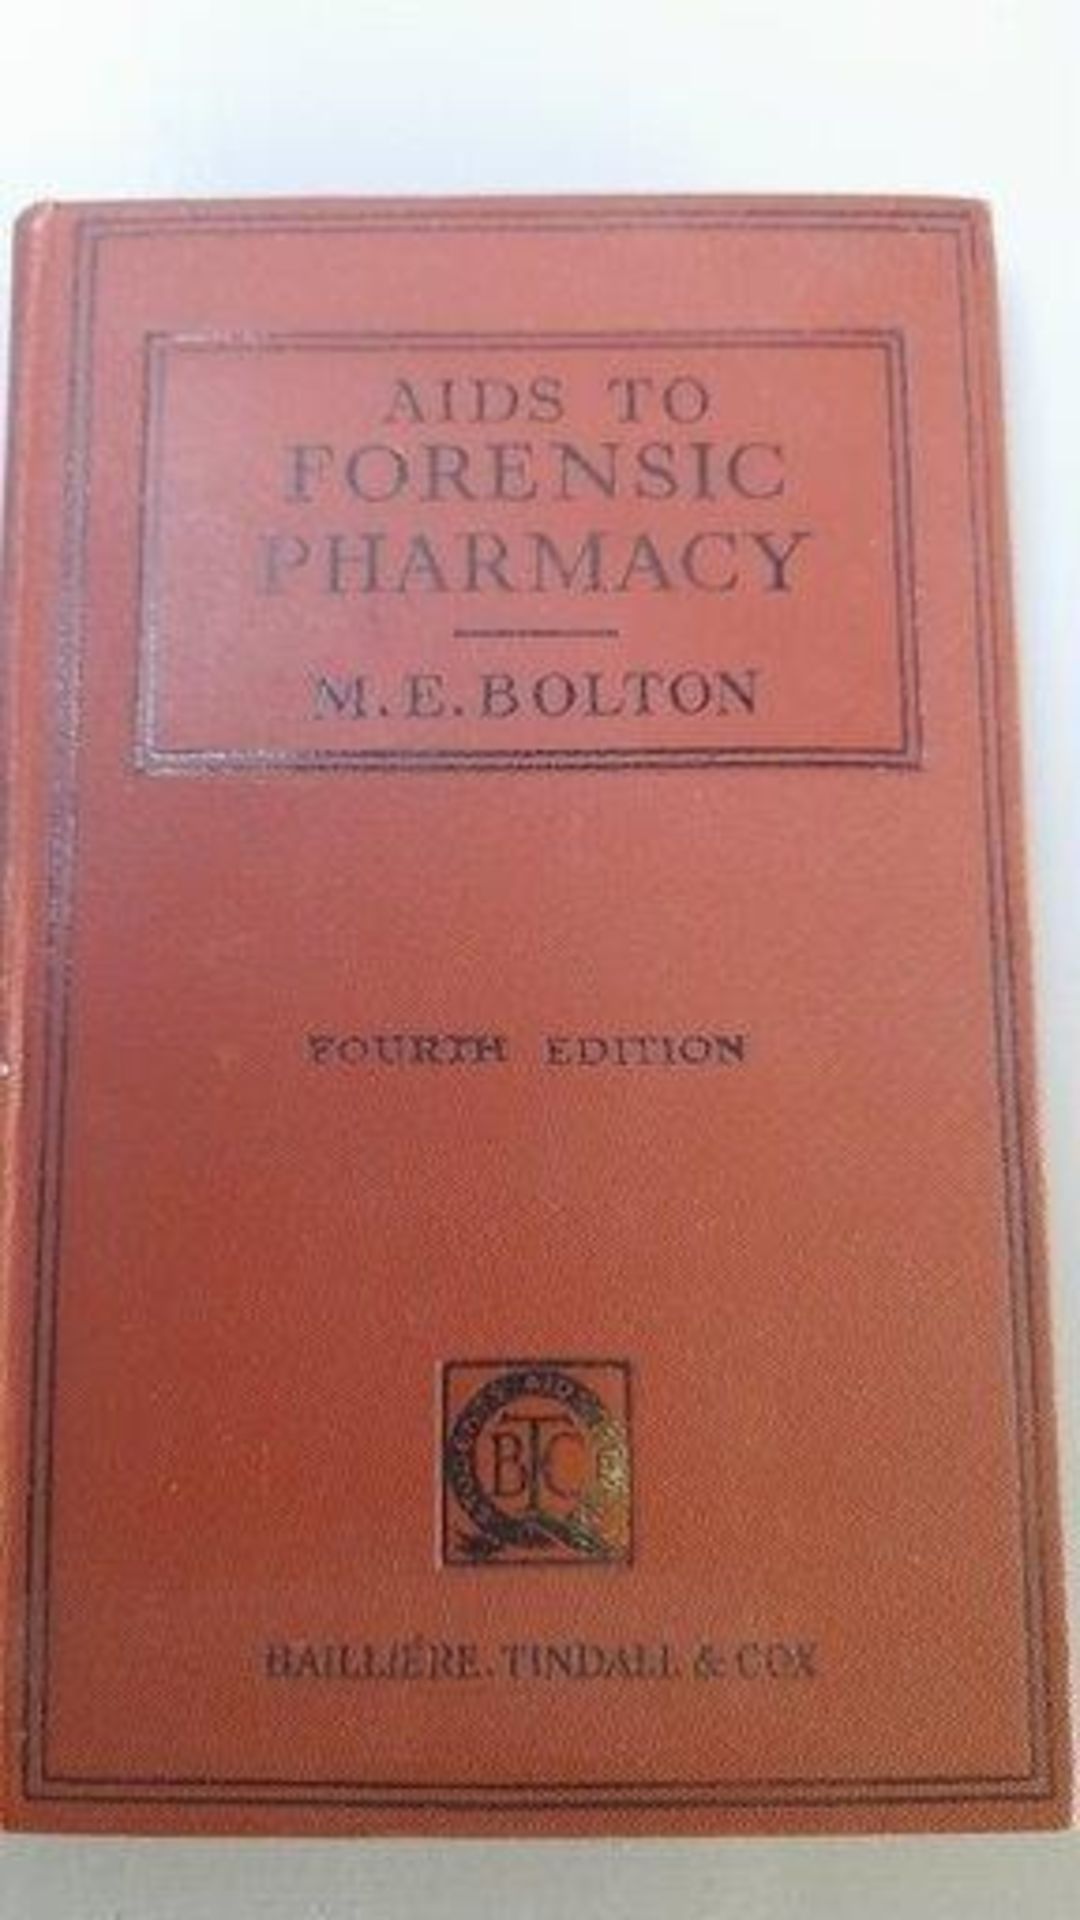 5 Volumes - Mary E Bolton - Aids To Forensic Pharmacy 1949 (Fourth Edition), Trevor Illtyd Williams  - Image 2 of 9